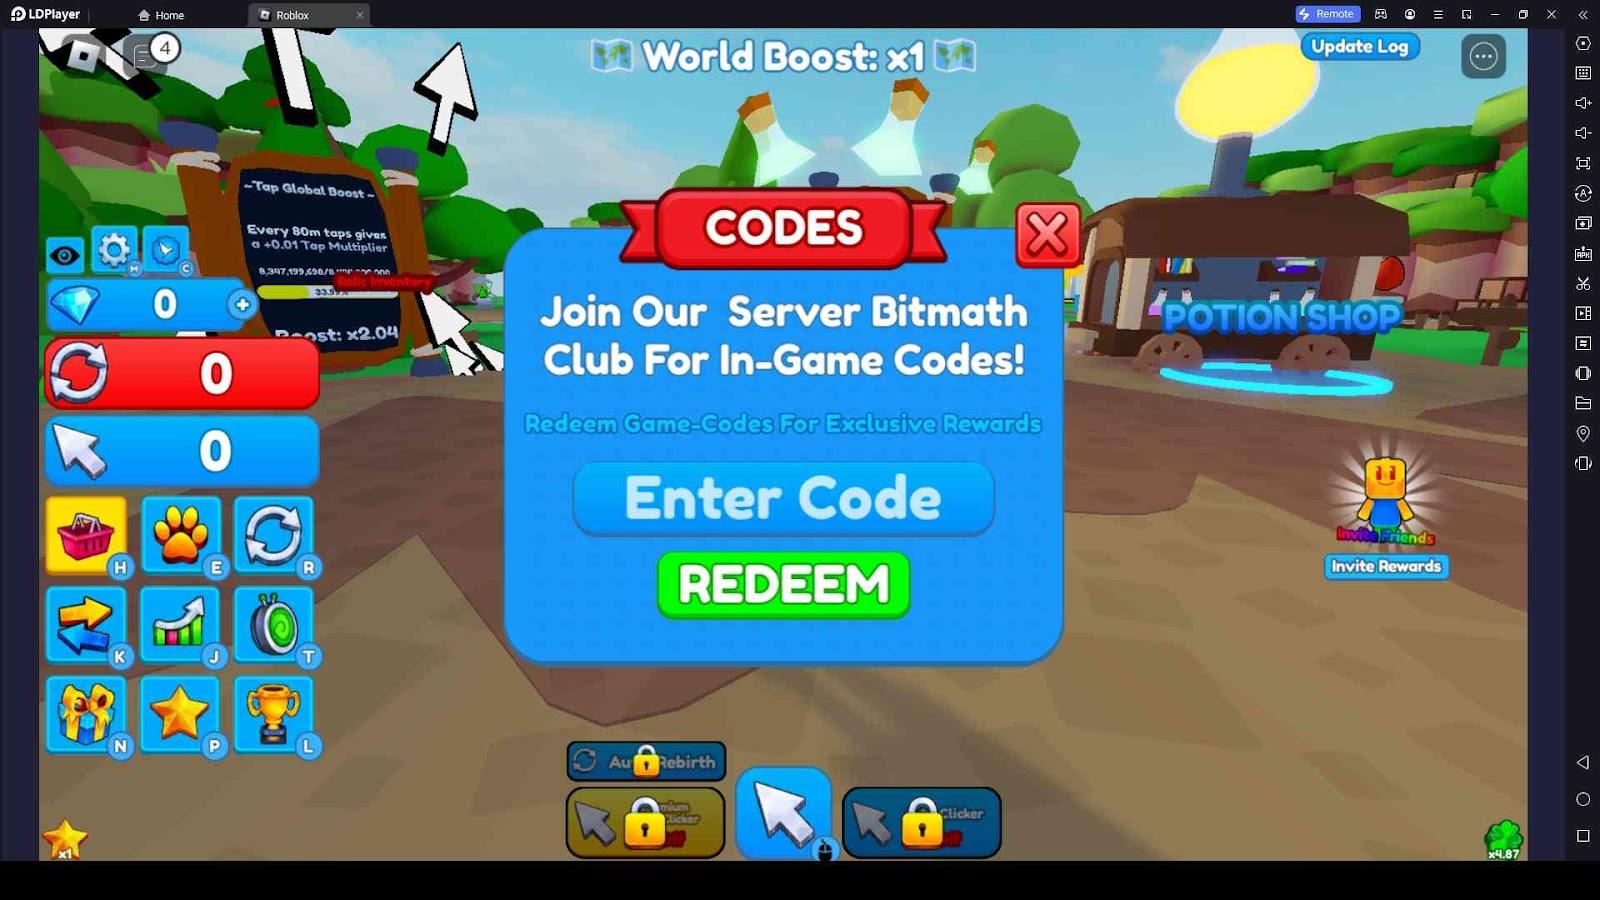 Roblox codes December 2023: Free items and how to redeem